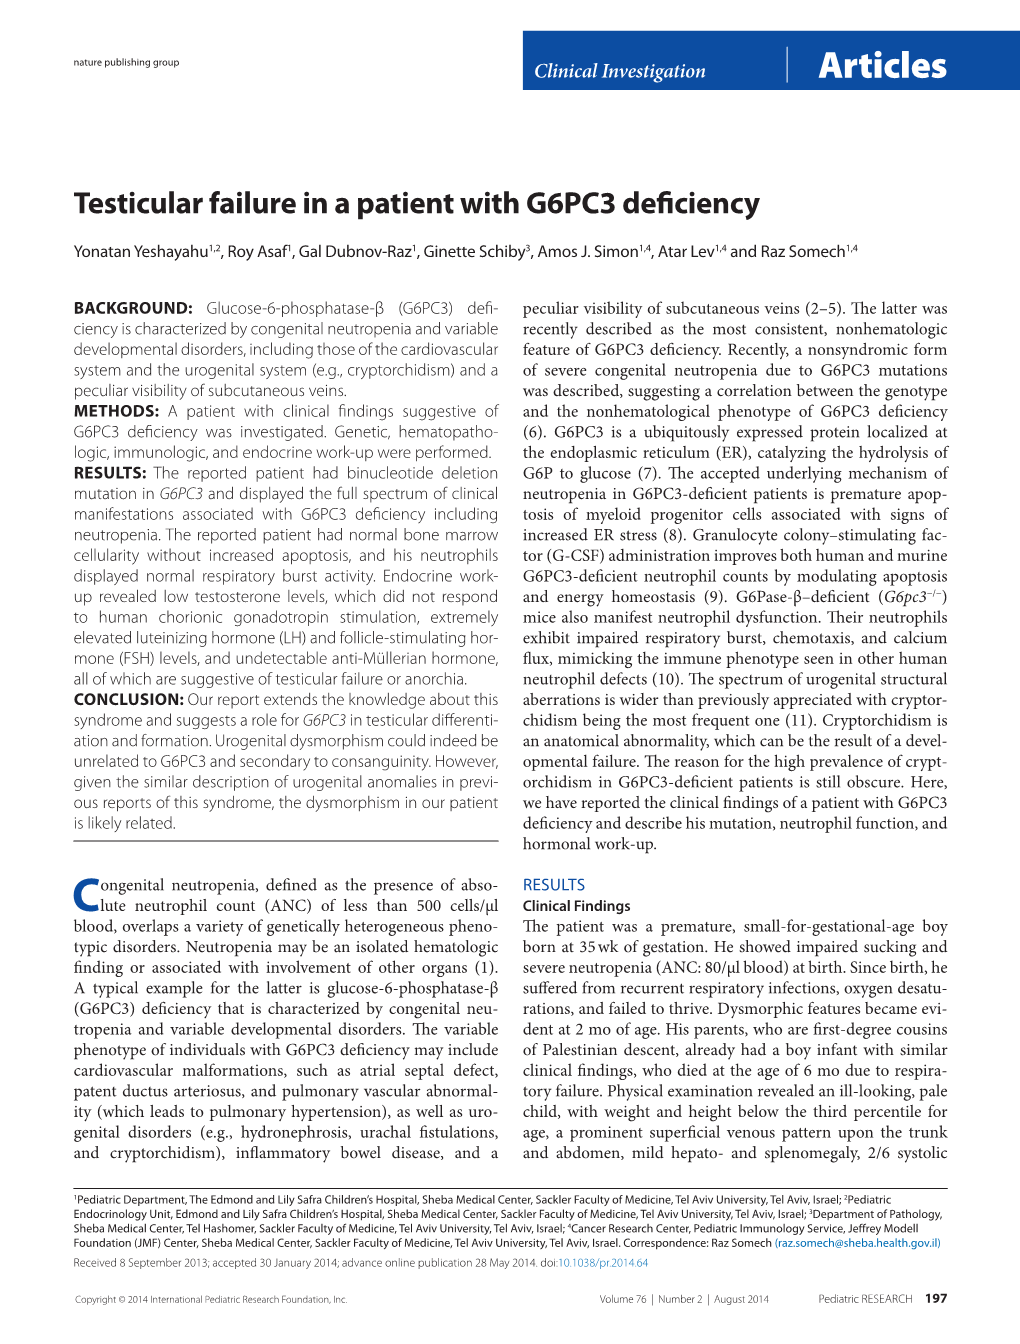 Testicular Failure in a Patient with G6PC3 Deficiency